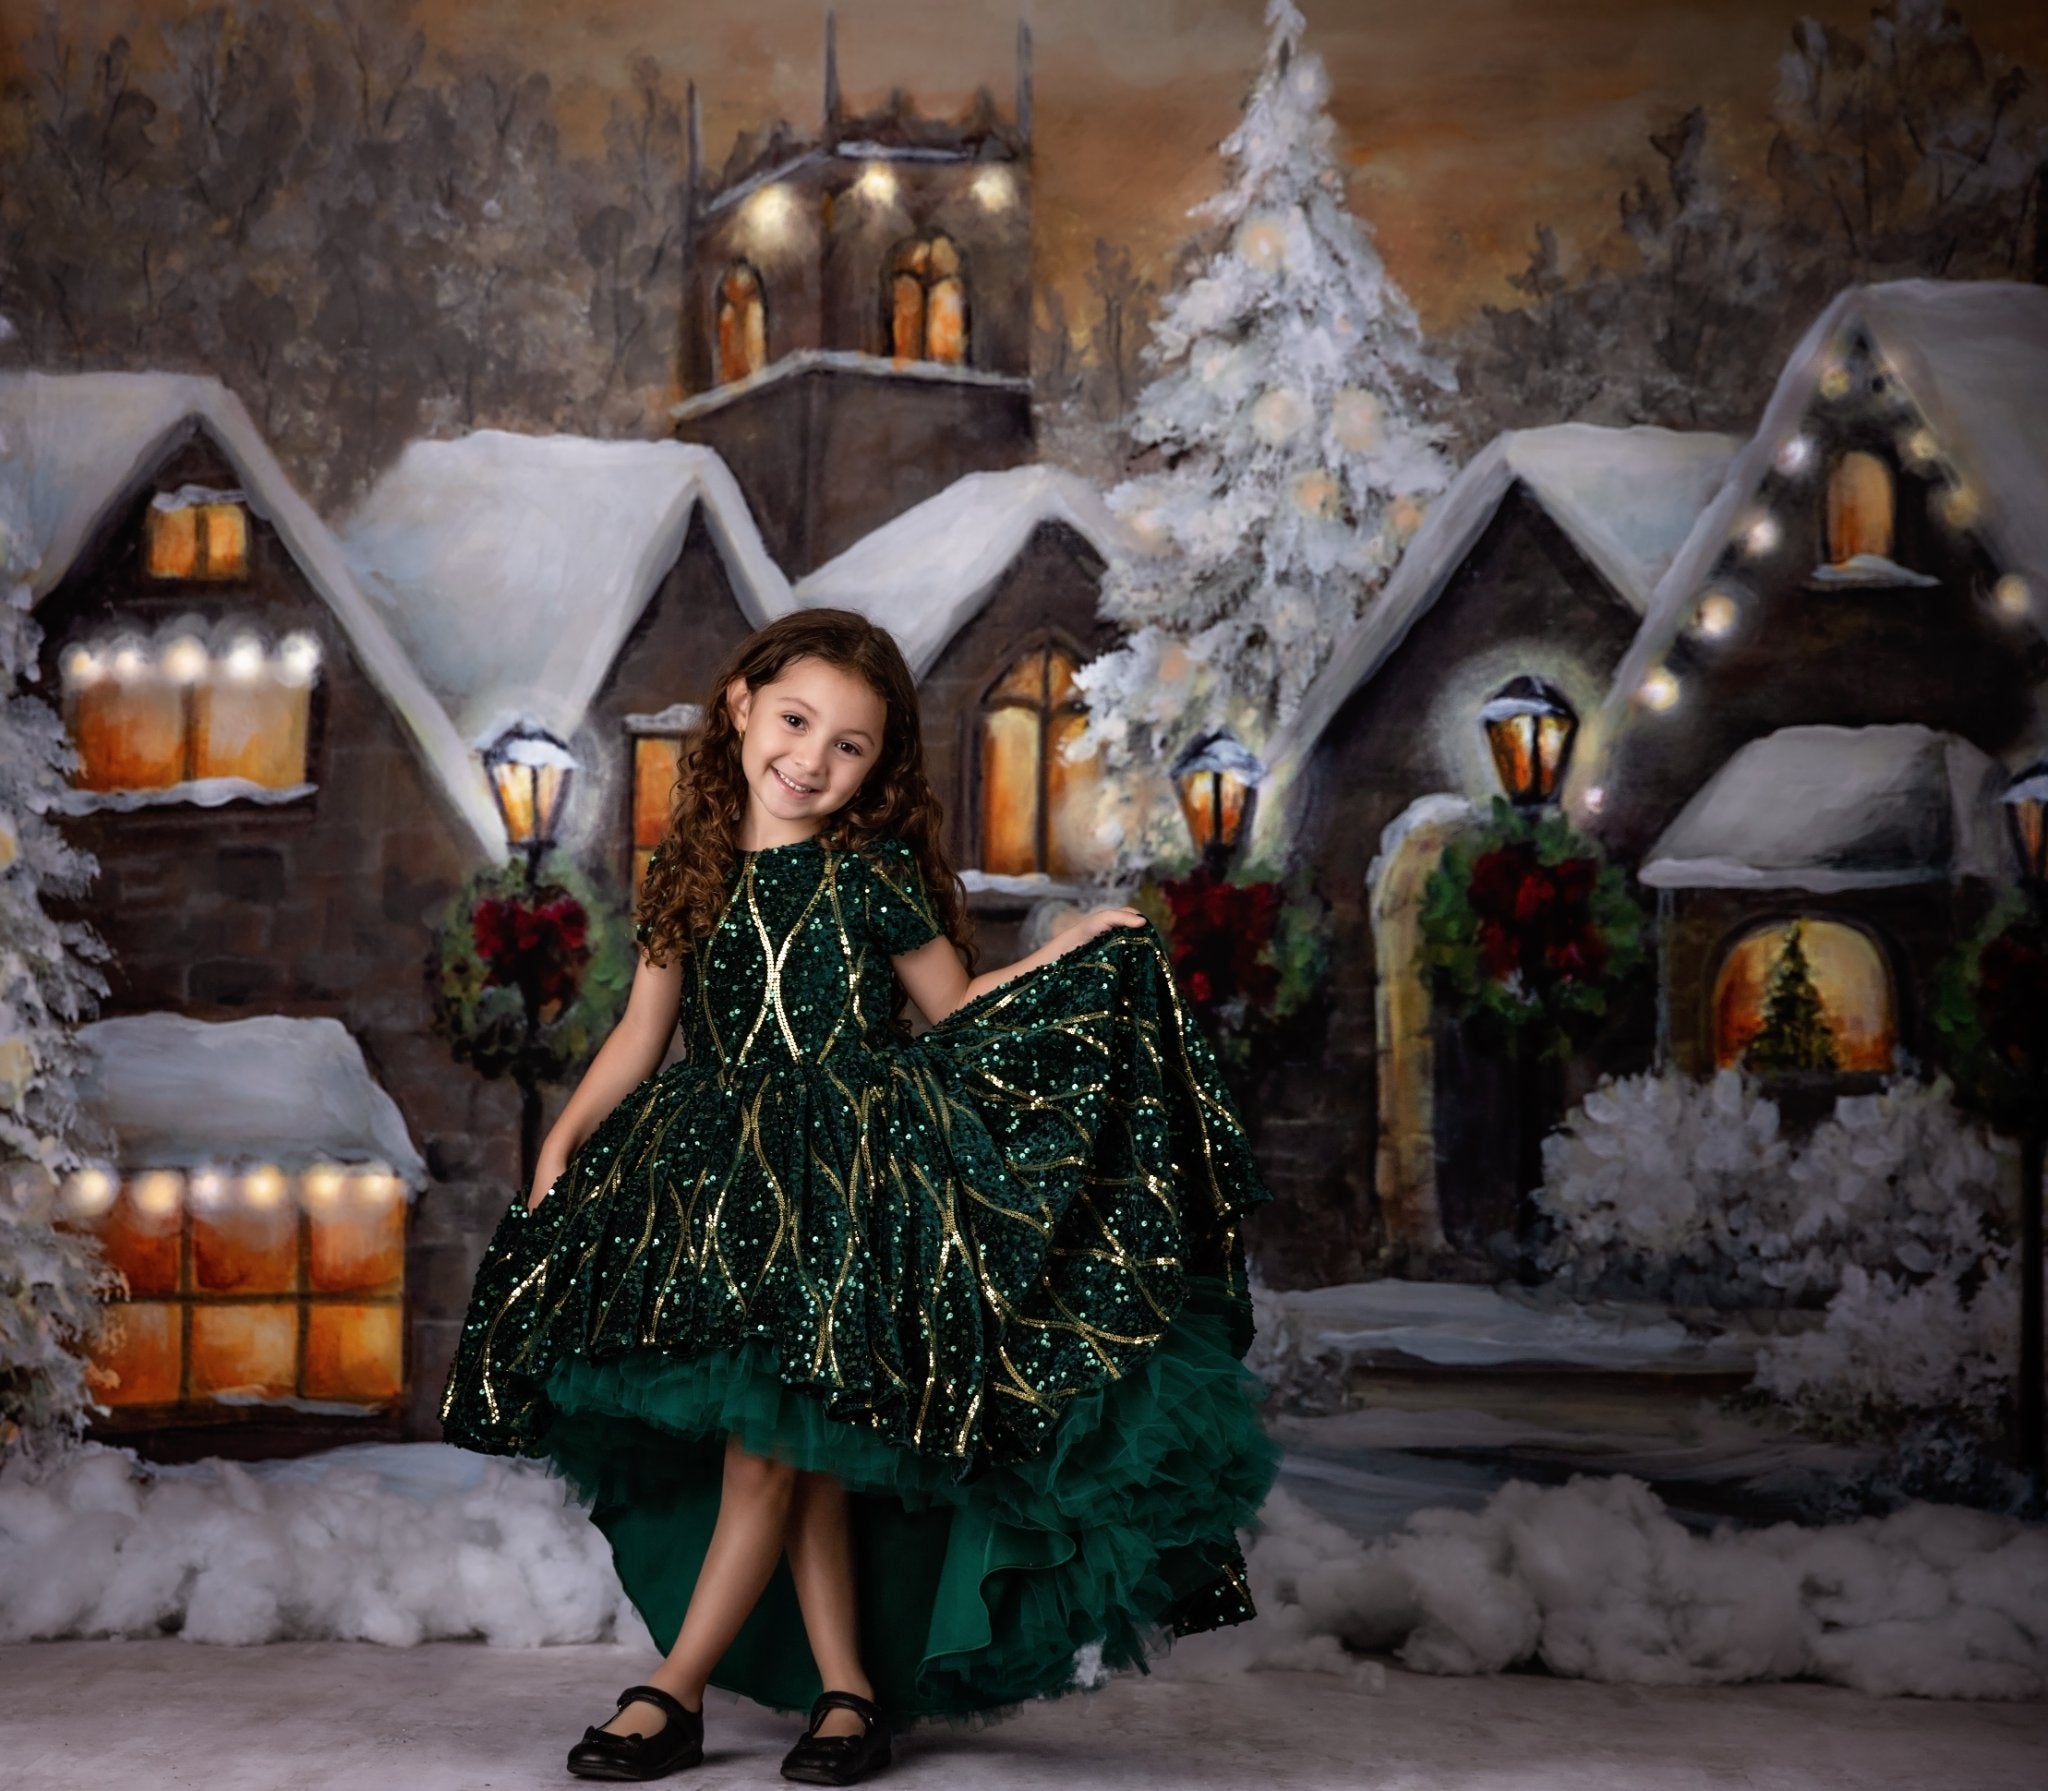 couture gown rental -  Holiday couture gown rental -perfect for photography sessions using babydream backdrops and other fine art drops.